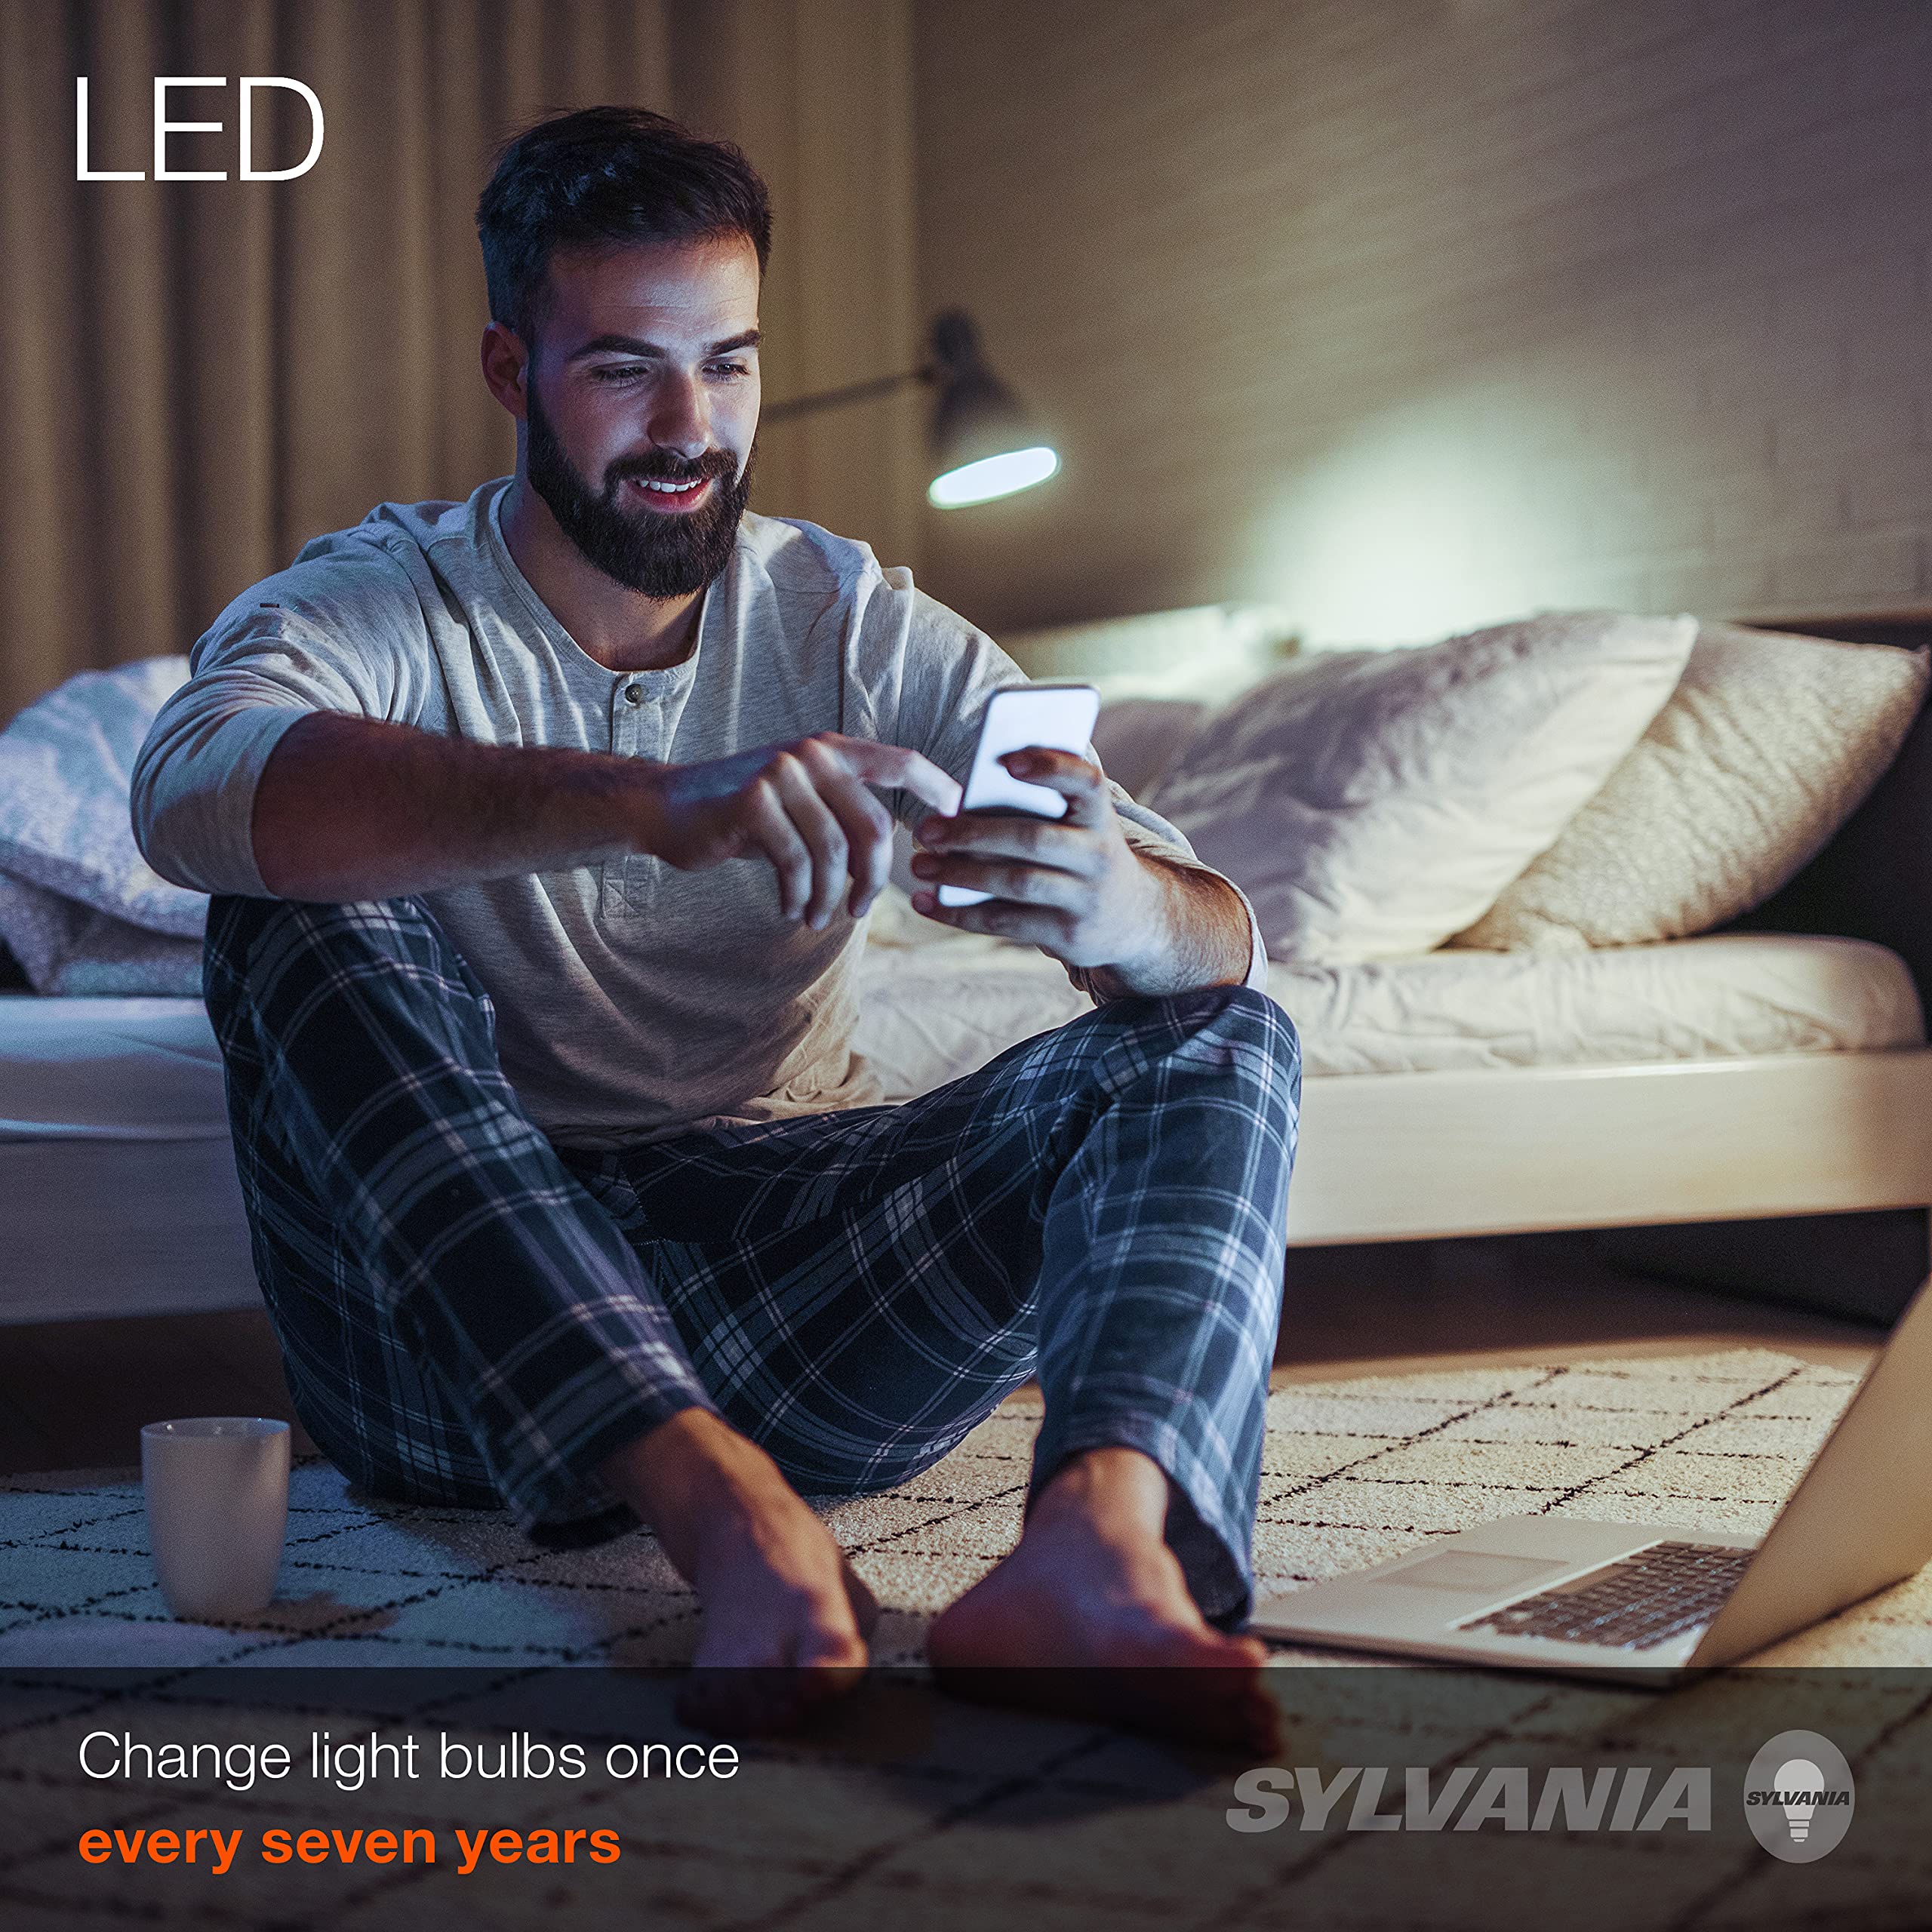 SYLVANIA ECO LED A19 Light Bulb, 60W Equivalent, Efficient 9W, 7 Year, 750 Lumens, Non-Dimmable, Frosted, 5000K Daylight - 24 Pack (40987)